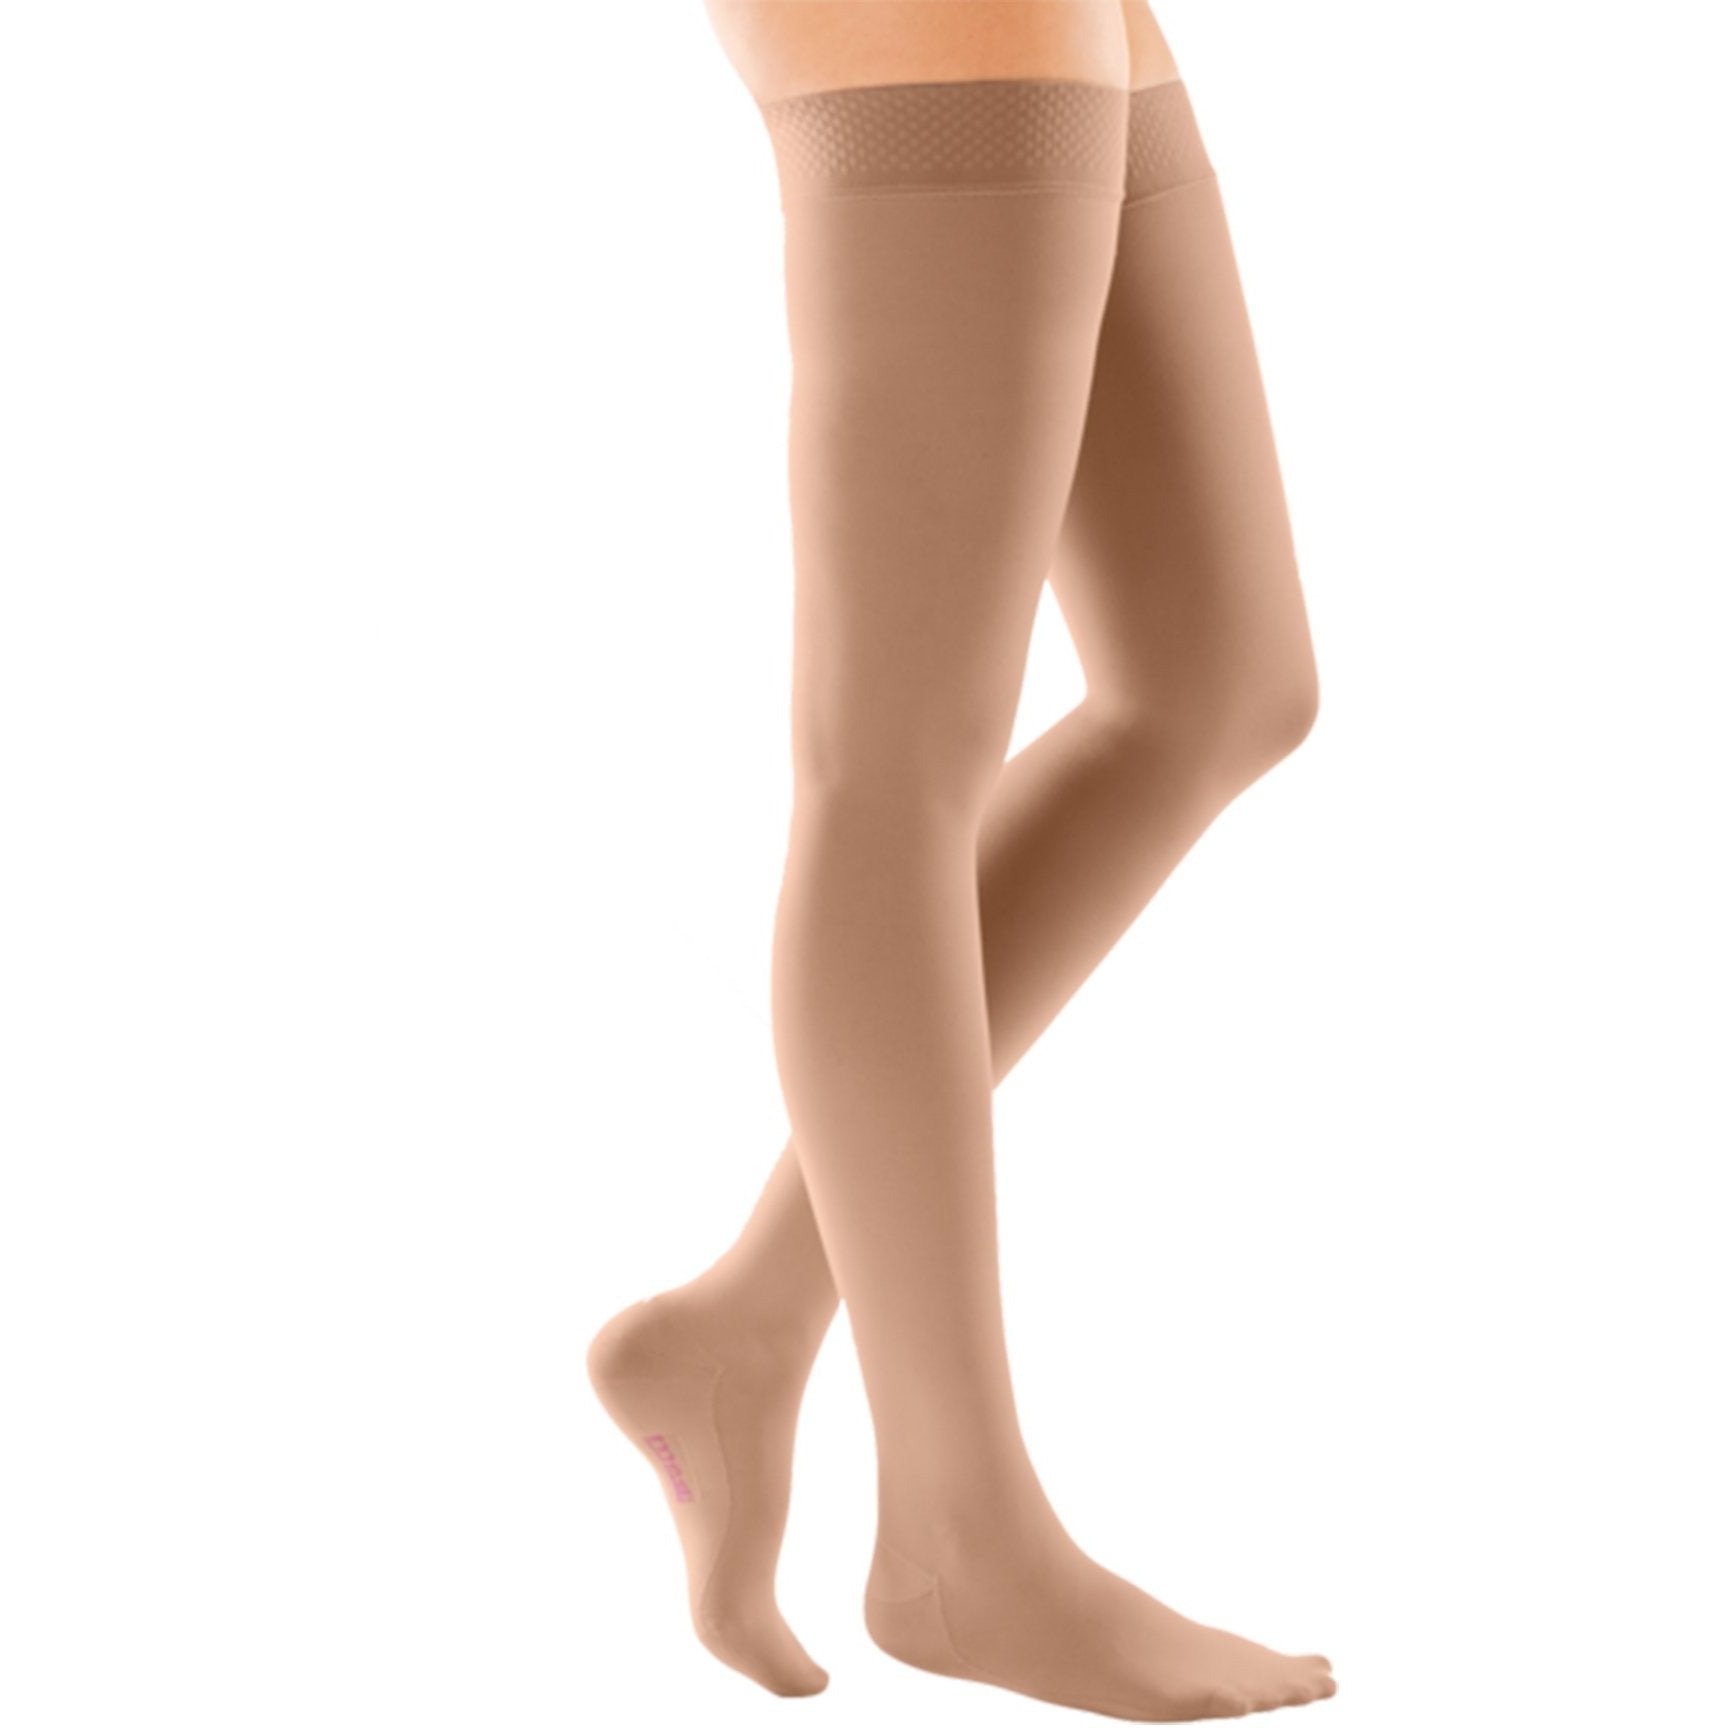 mediven comfort, 15-20 mmHg, Thigh High with Silicone Top-Band, Closed Toe